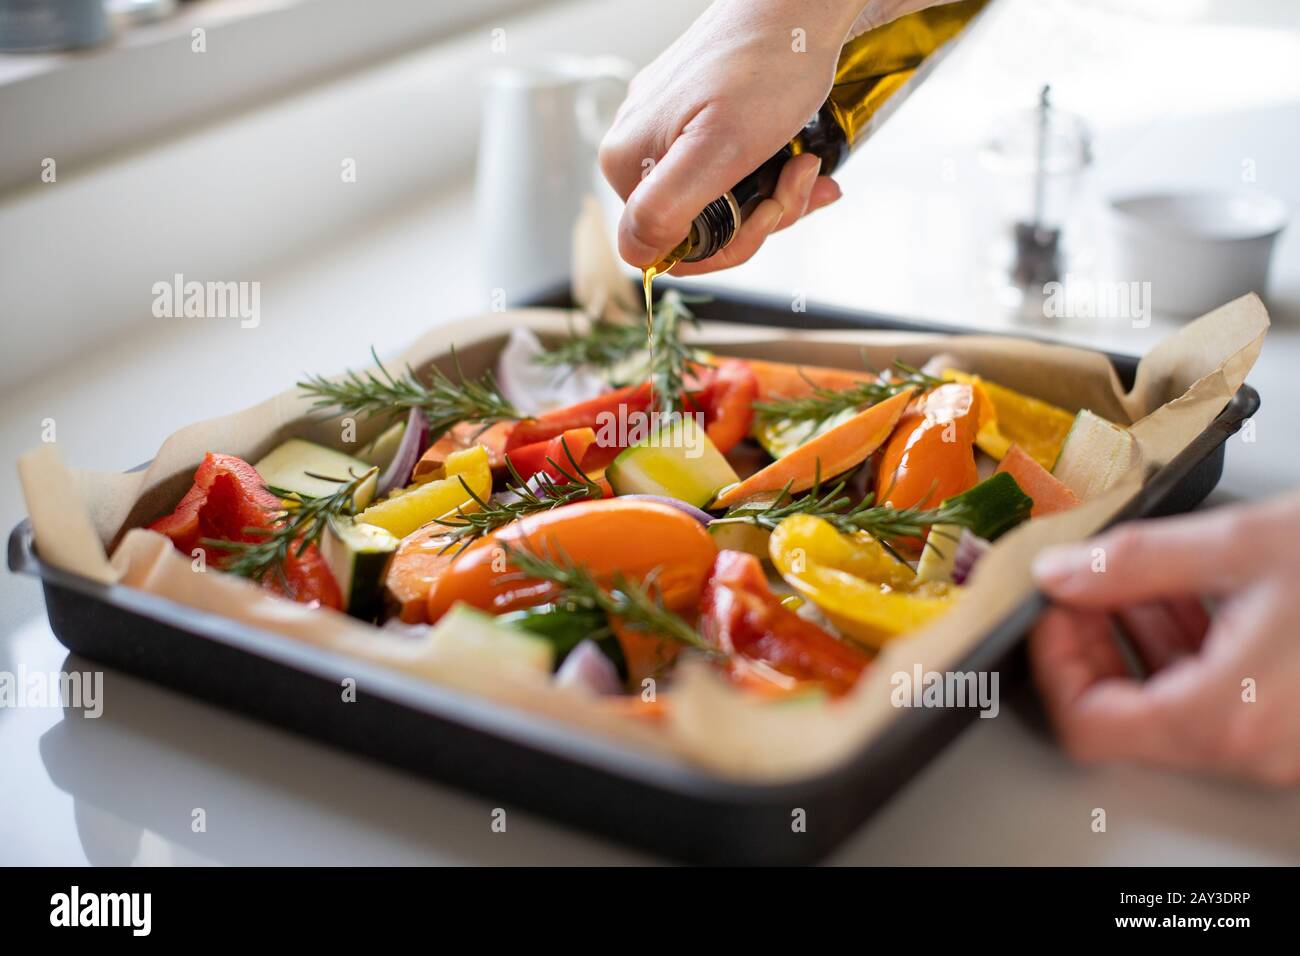 Close Up Of Seasoning Tray Of Vegetables For Roasting With Olive Oil Ready For Vegan Meal Stock Photo